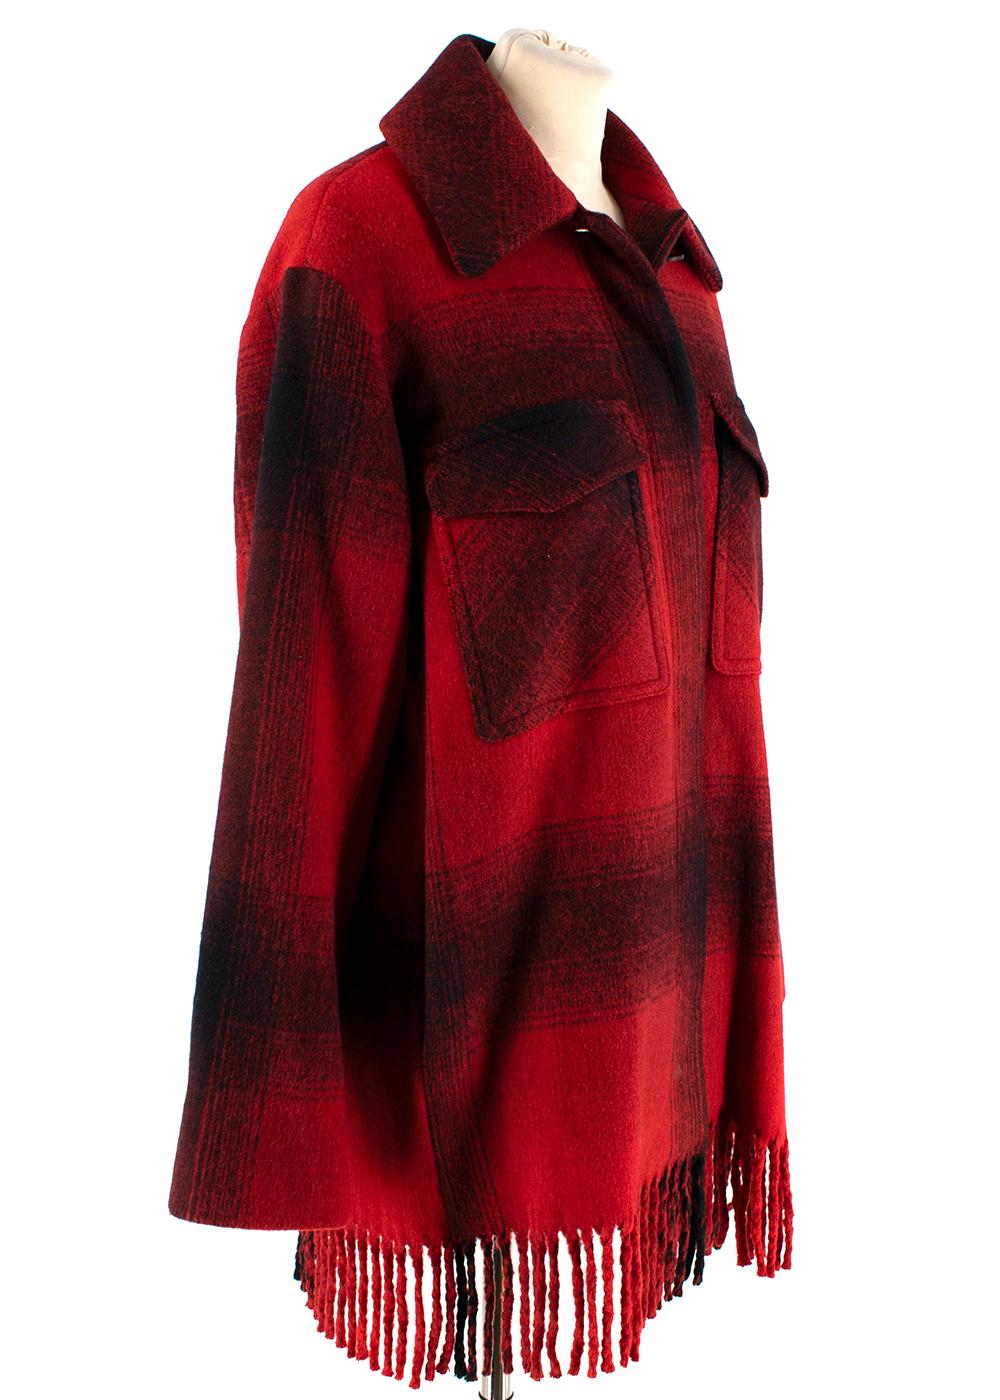 Alexander Wang Red & Black Checked Flannel Coat

- Red and black flannel
- Hidden button fastenings through front
- An oversized fit, cut to be worn very loose
- Mid-weight, stretchy fabric
- Twisted fringe trims
- Utility patch pockets on front
-